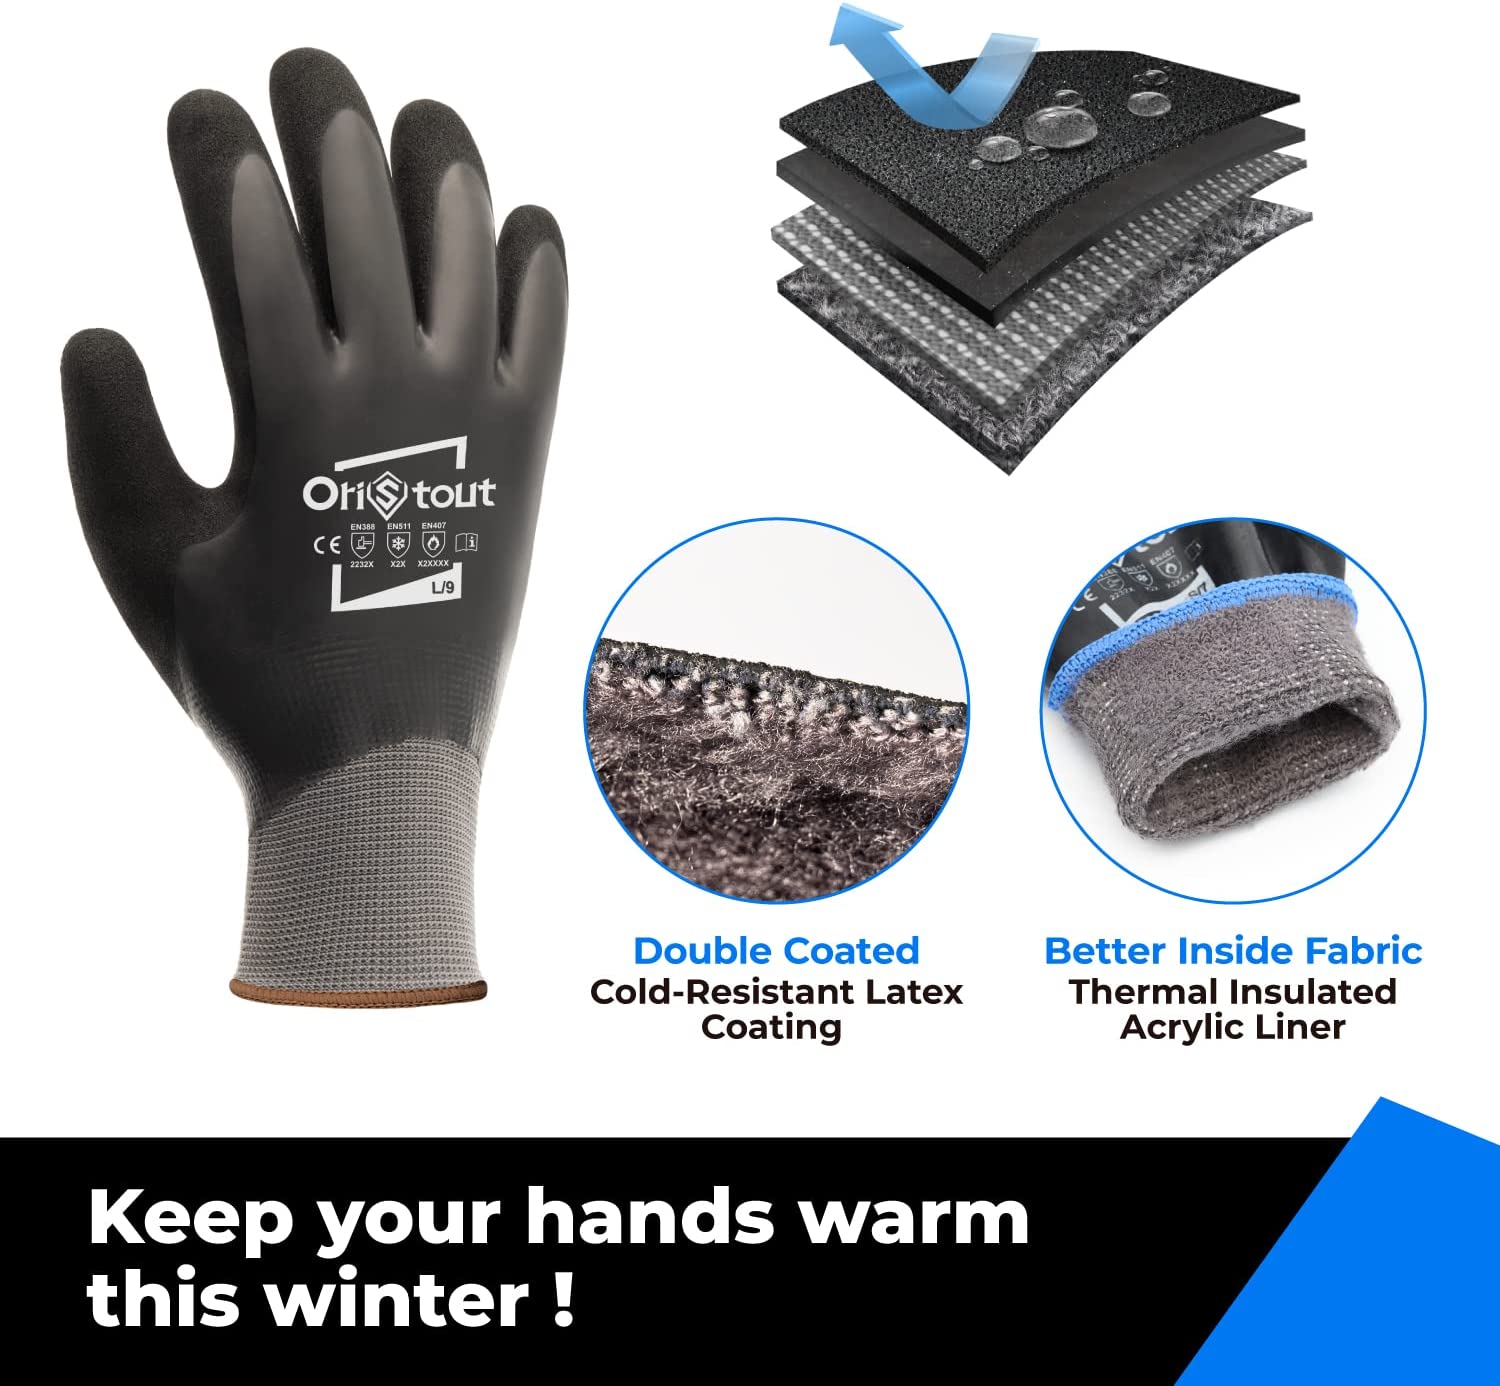 Waterproof Winter Work Gloves, Touchscreen, Freezer Gloves for Cold Weather, Thermal Insulated Fishing Gloves